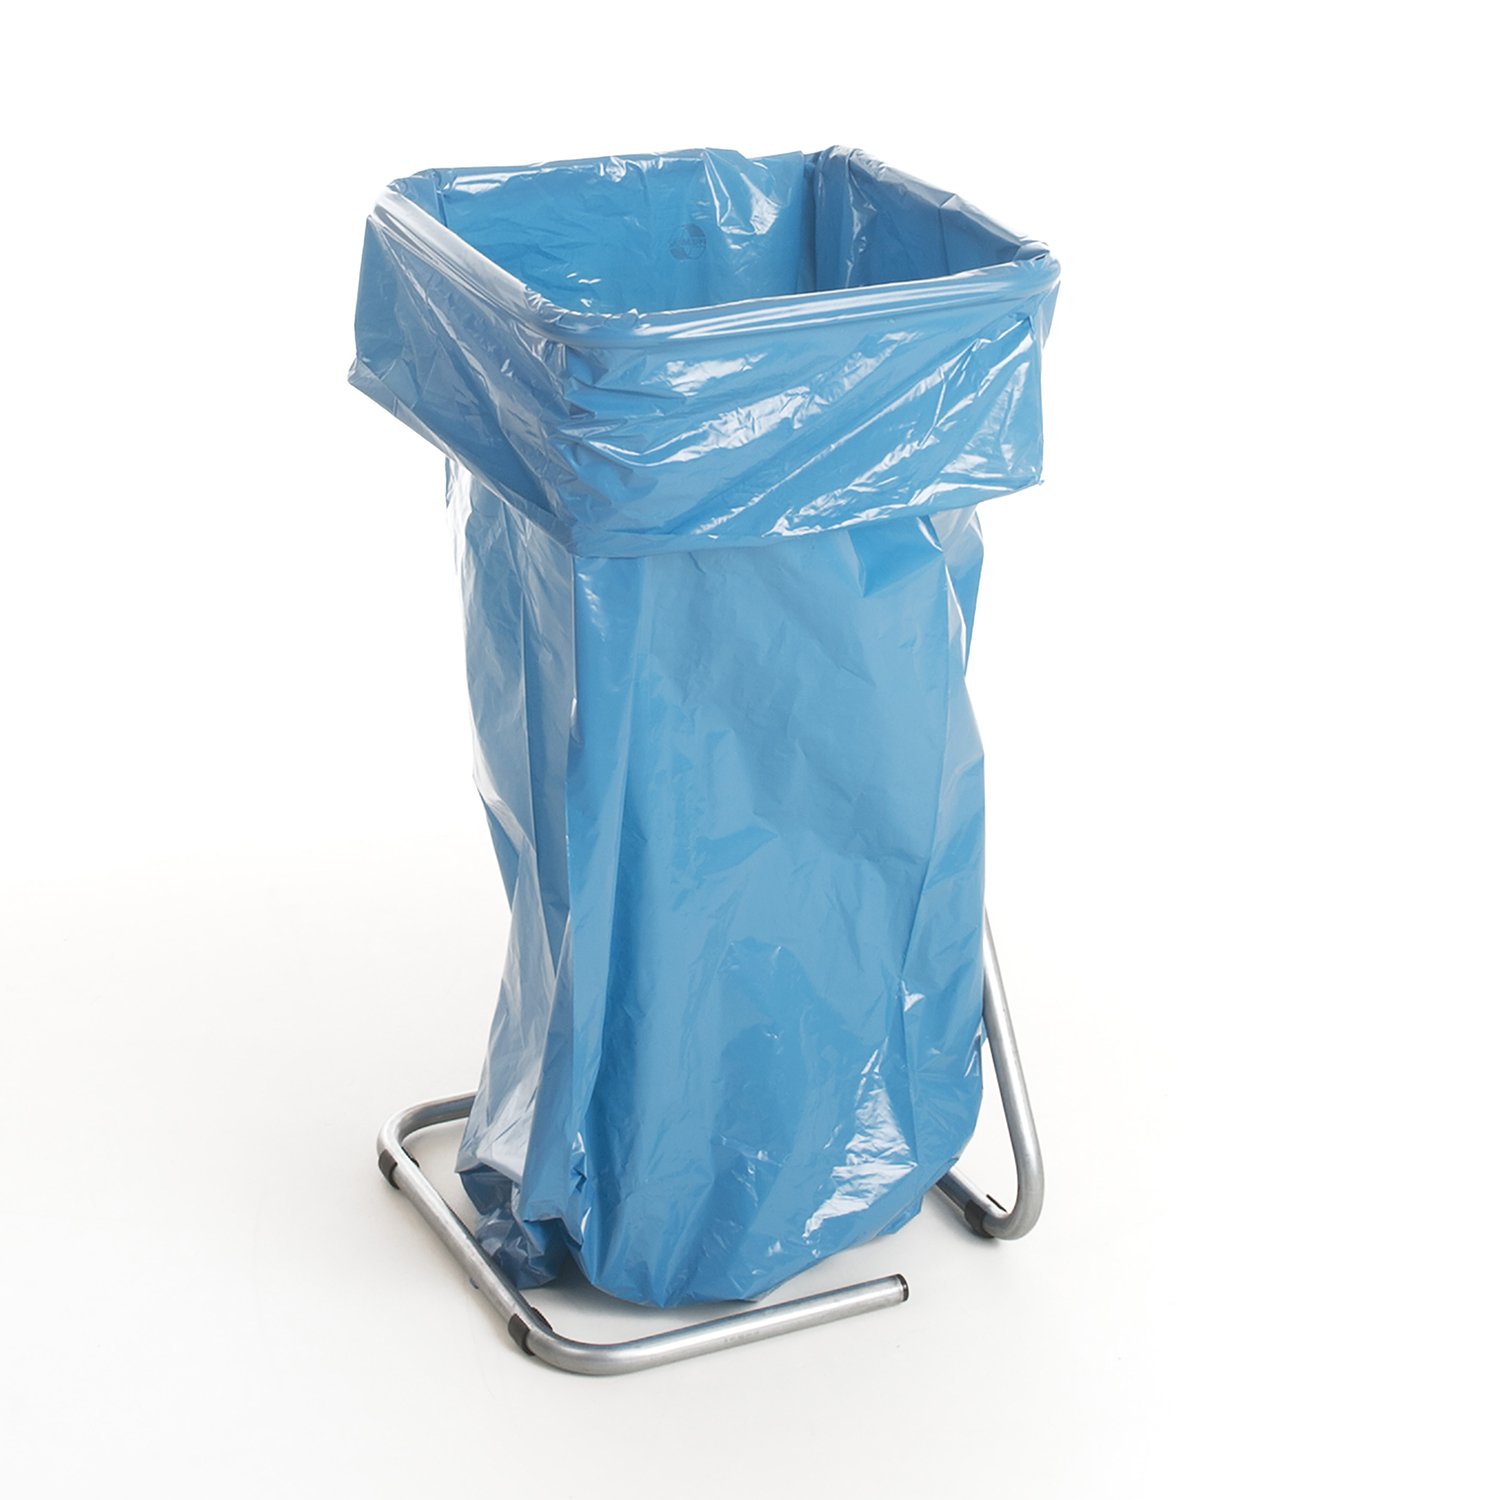 Waste bag 120 l, LDPE recyclate, 35 mu, blue bag, no print, unperforated, without closing ribbon detail 2